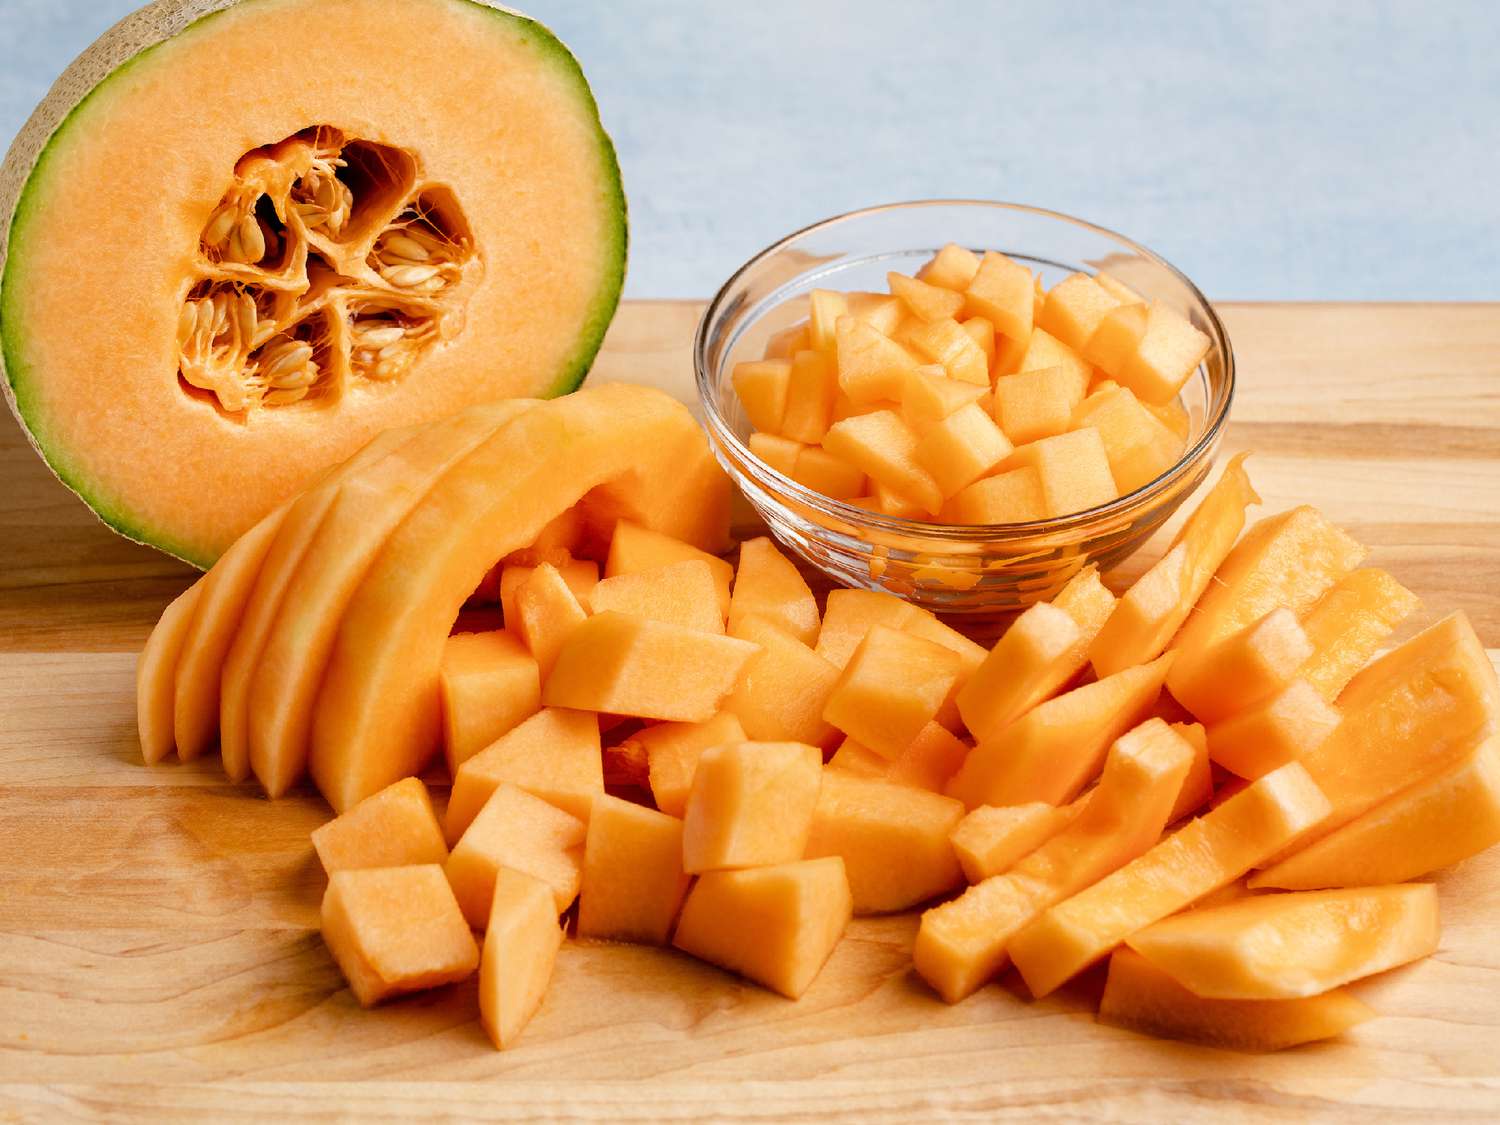 How To Store Cut Cantaloupe